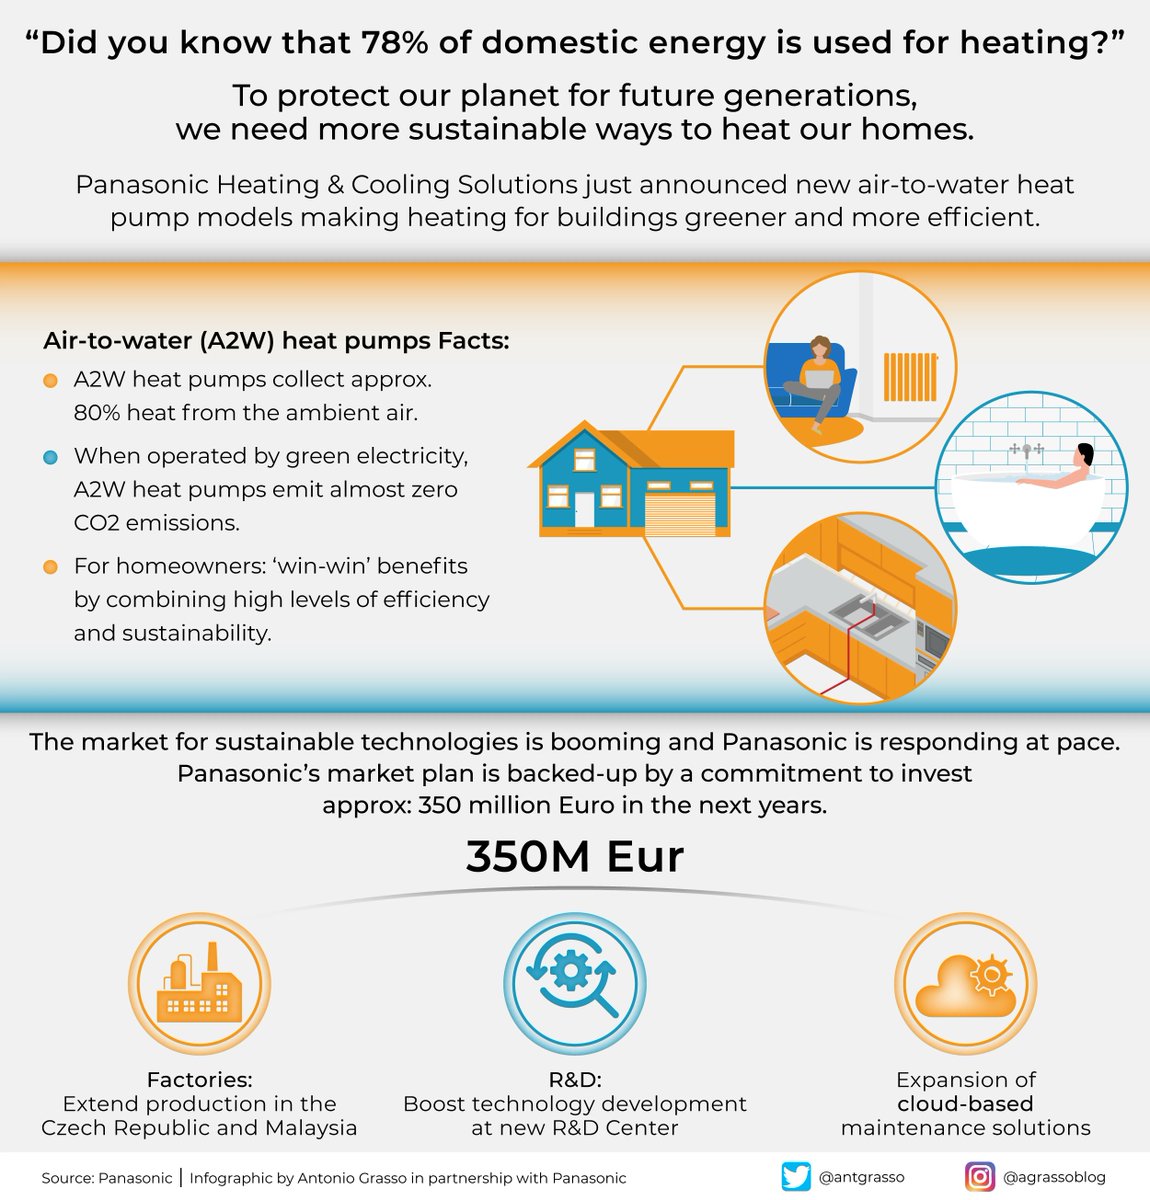 Europeans use 80% of their energy to produce heat. Air-to-water (A2W) heat pumps reduce emissions with air reuse capabilities, and Panasonic is committed to improving this technology.

More>> bit.ly/3NuobUt @Panasonic v @antgrasso #PanasonicPartner

#PanasonicGREENIMPACT